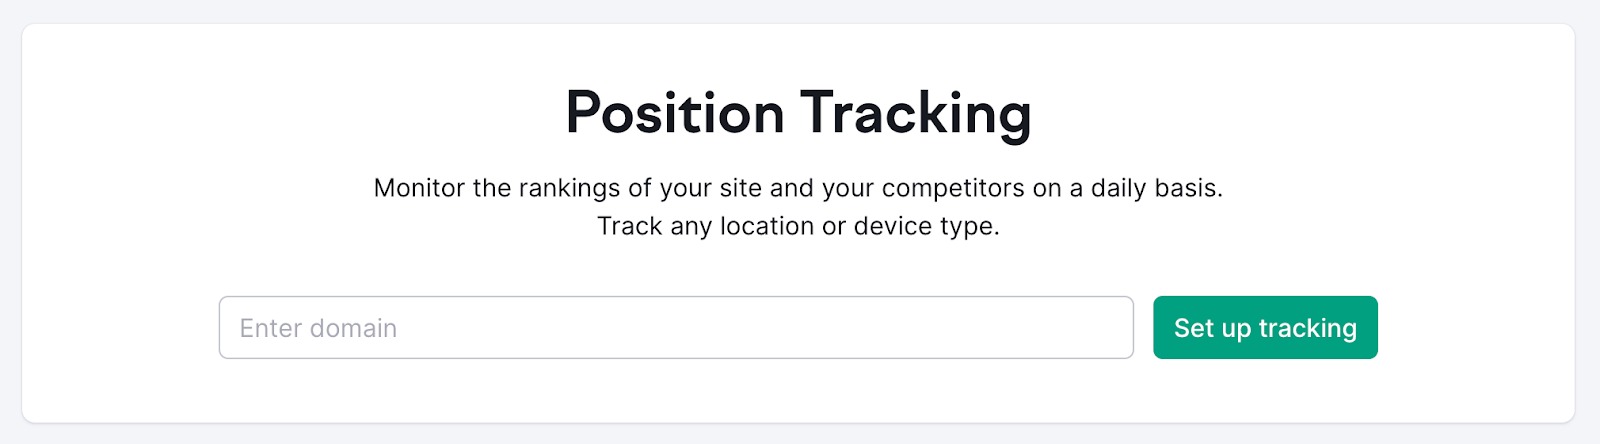 Position Tracking getting started